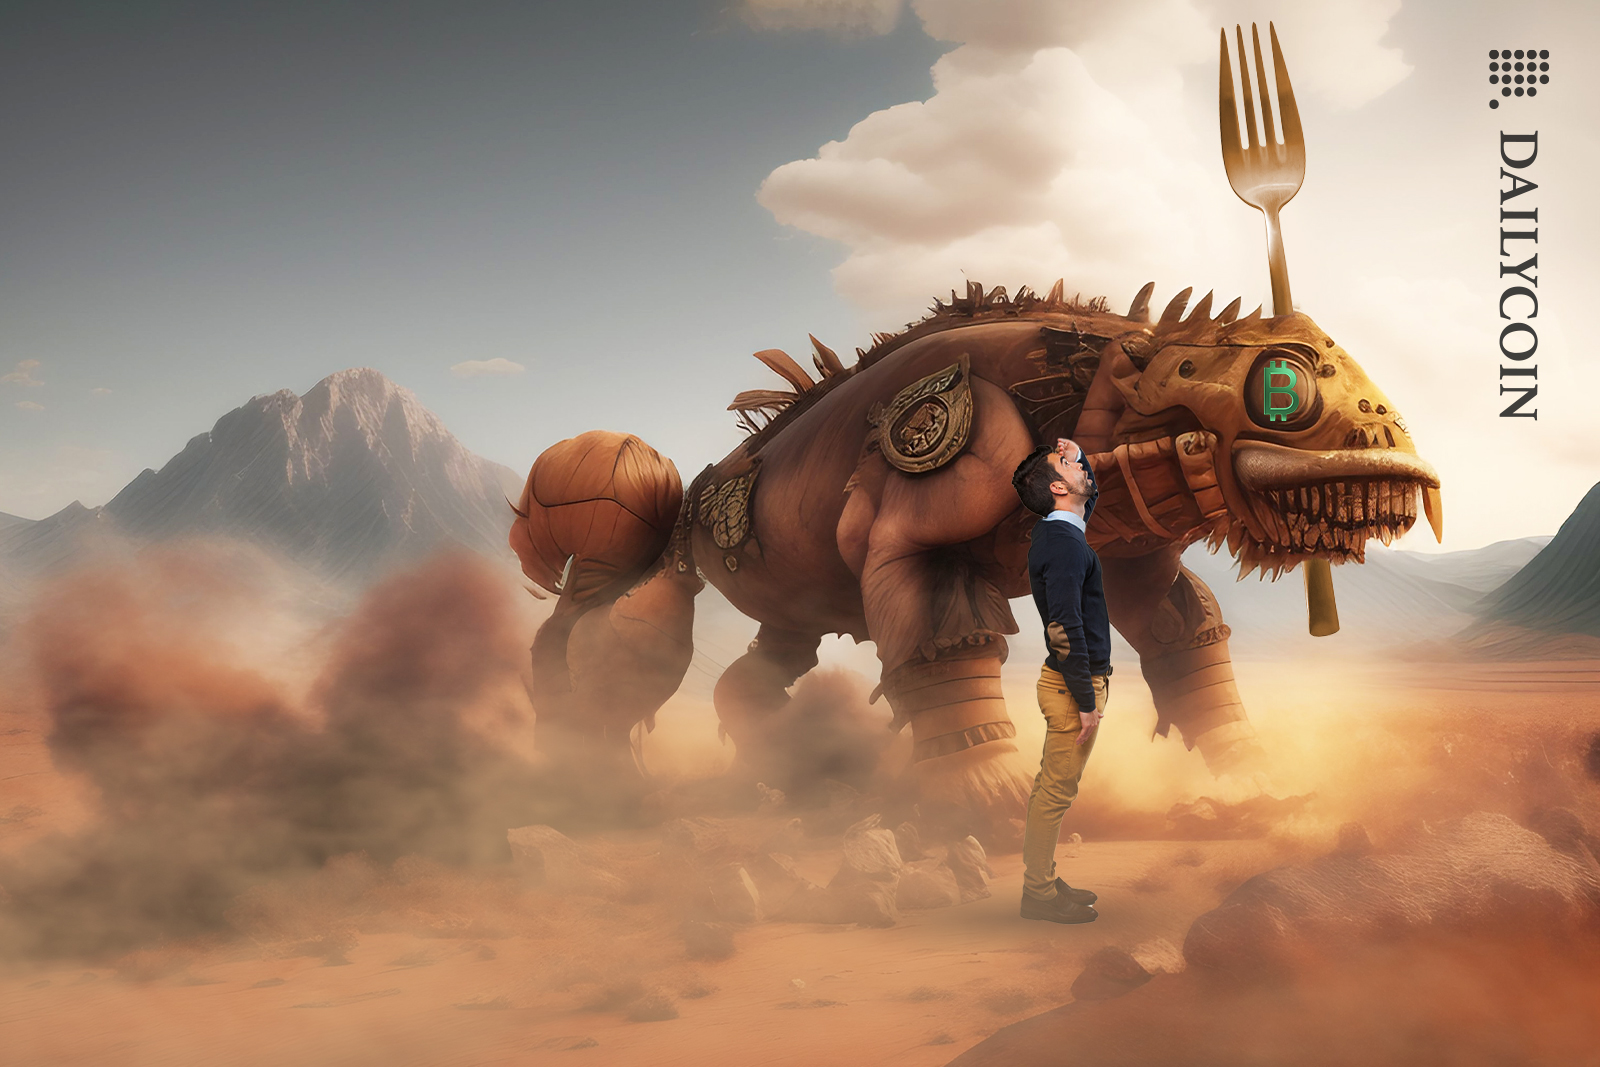 Man looking up at a big angry fork monster with Bitcoin eyes, in a desert land.